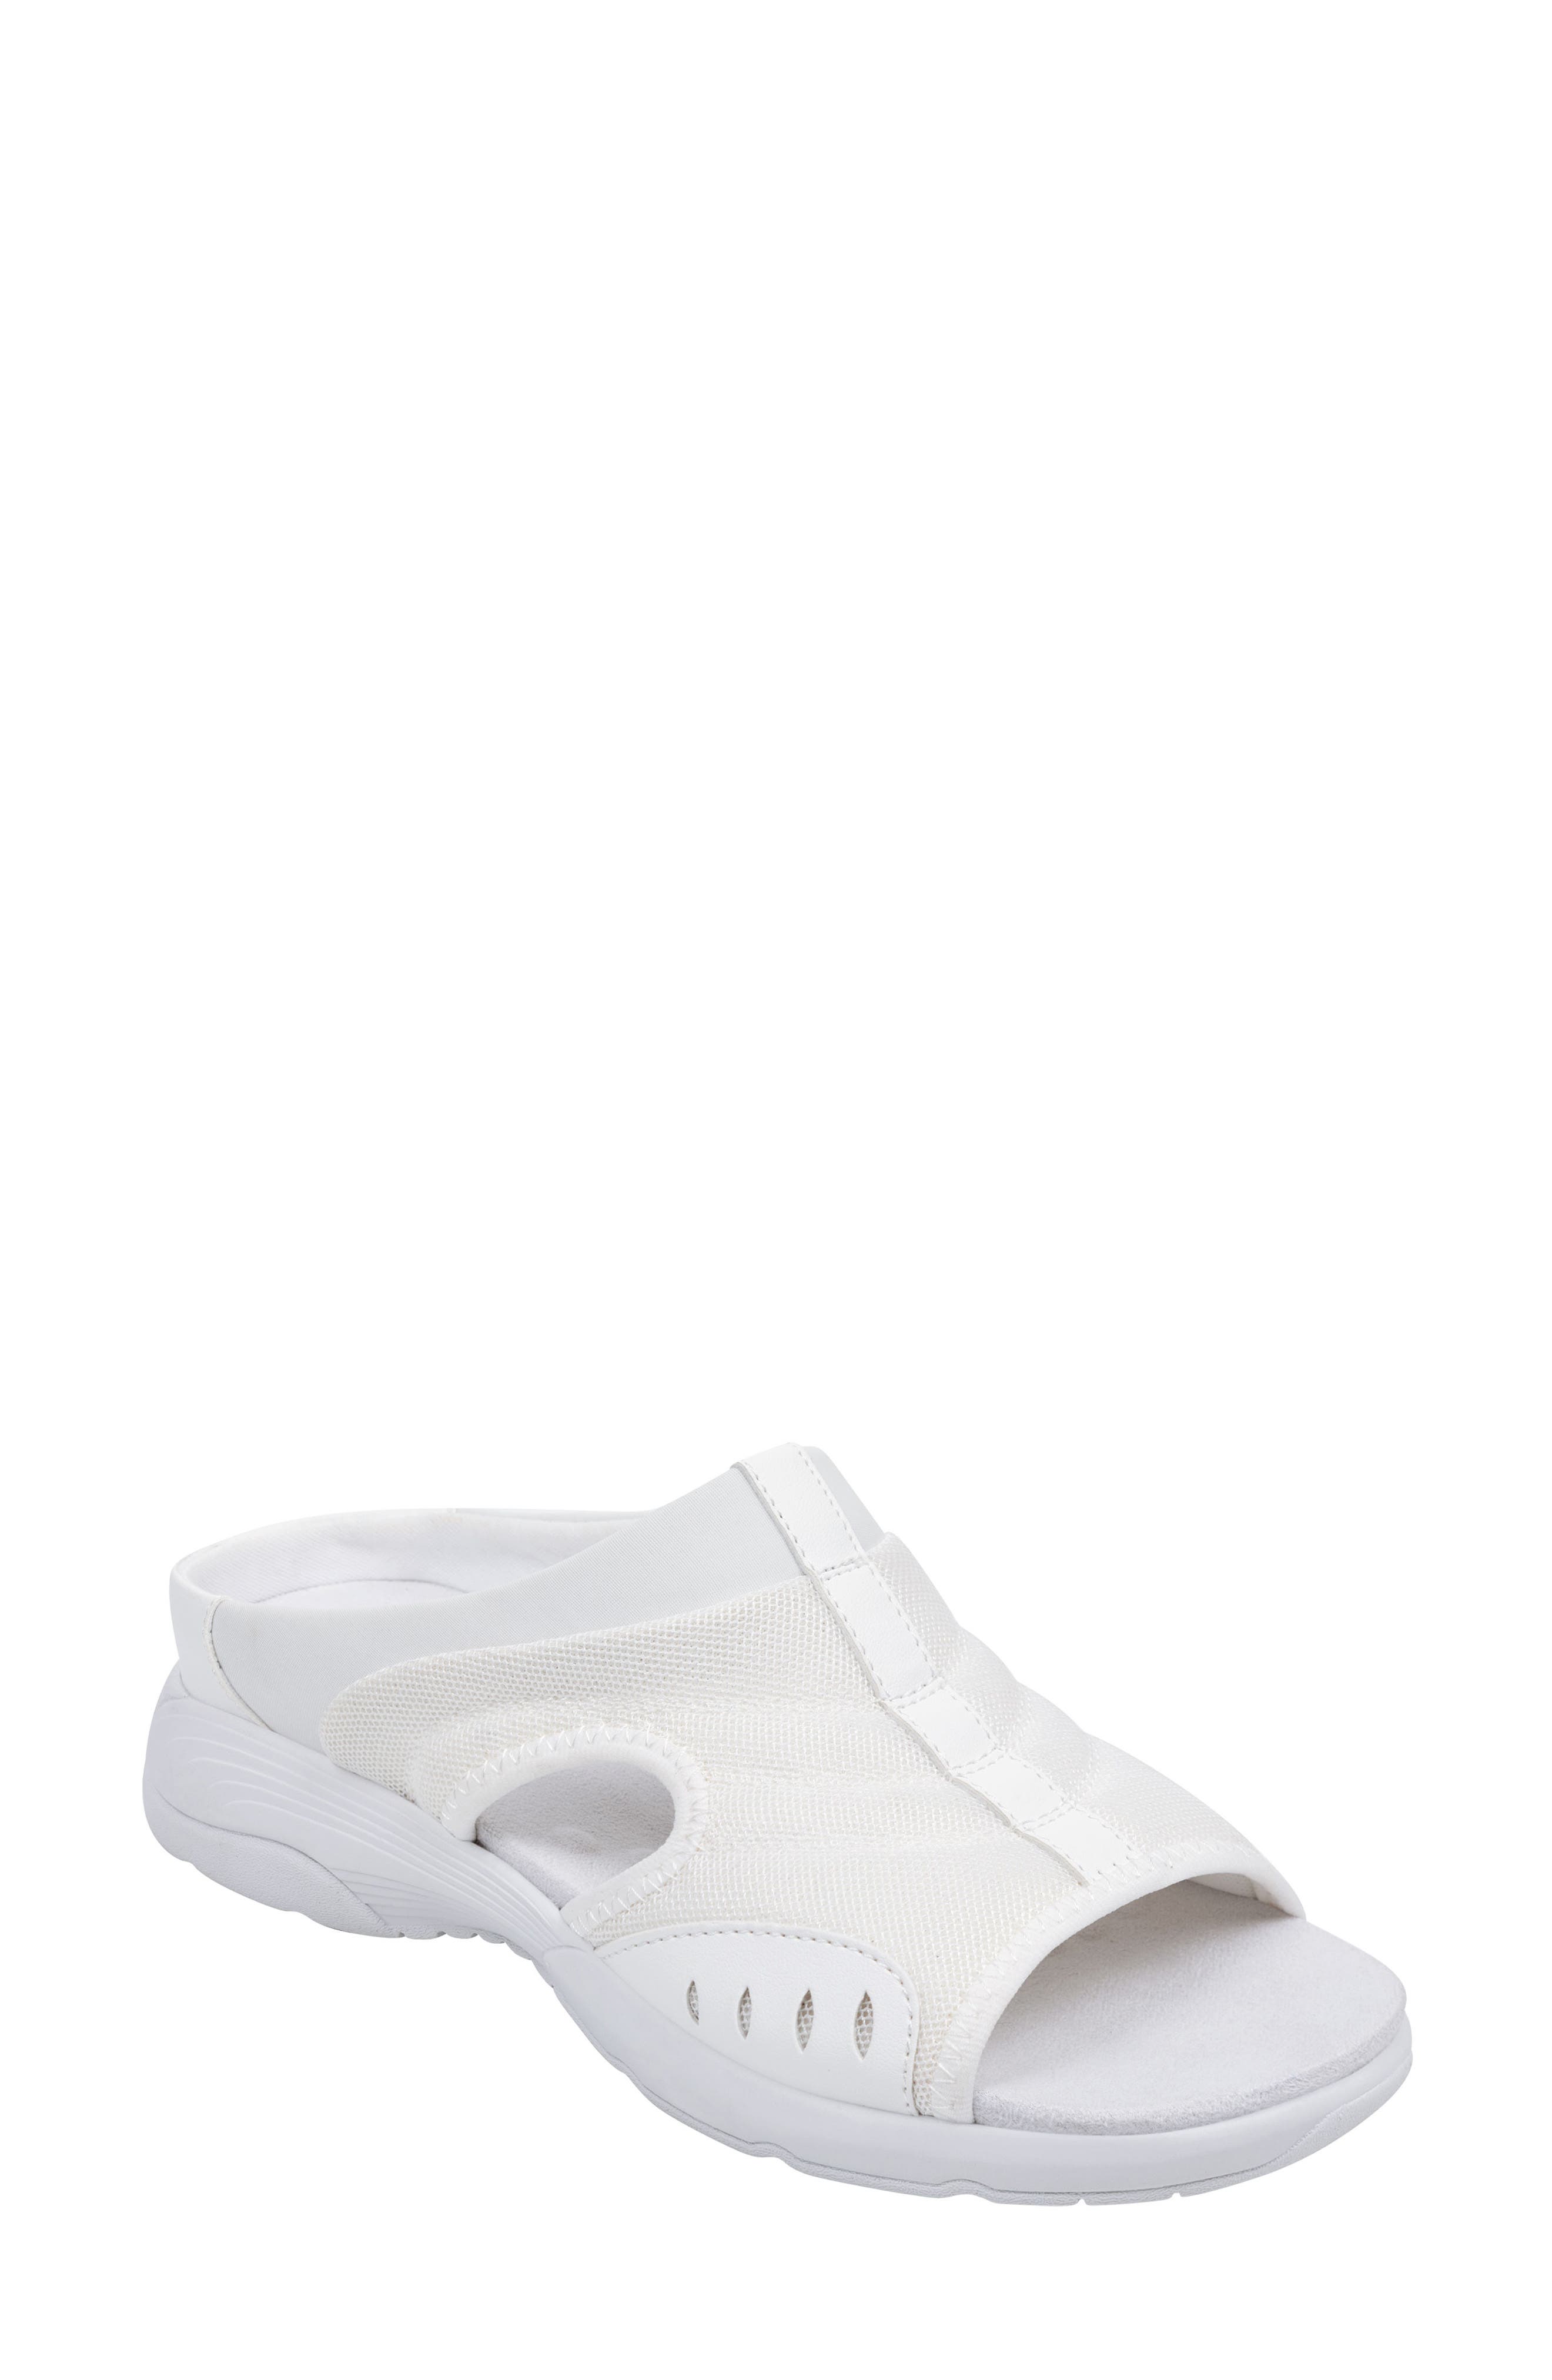 UPC 192733303791 product image for Easy Spirit Traciee Sandal in White at Nordstrom, Size 8 | upcitemdb.com